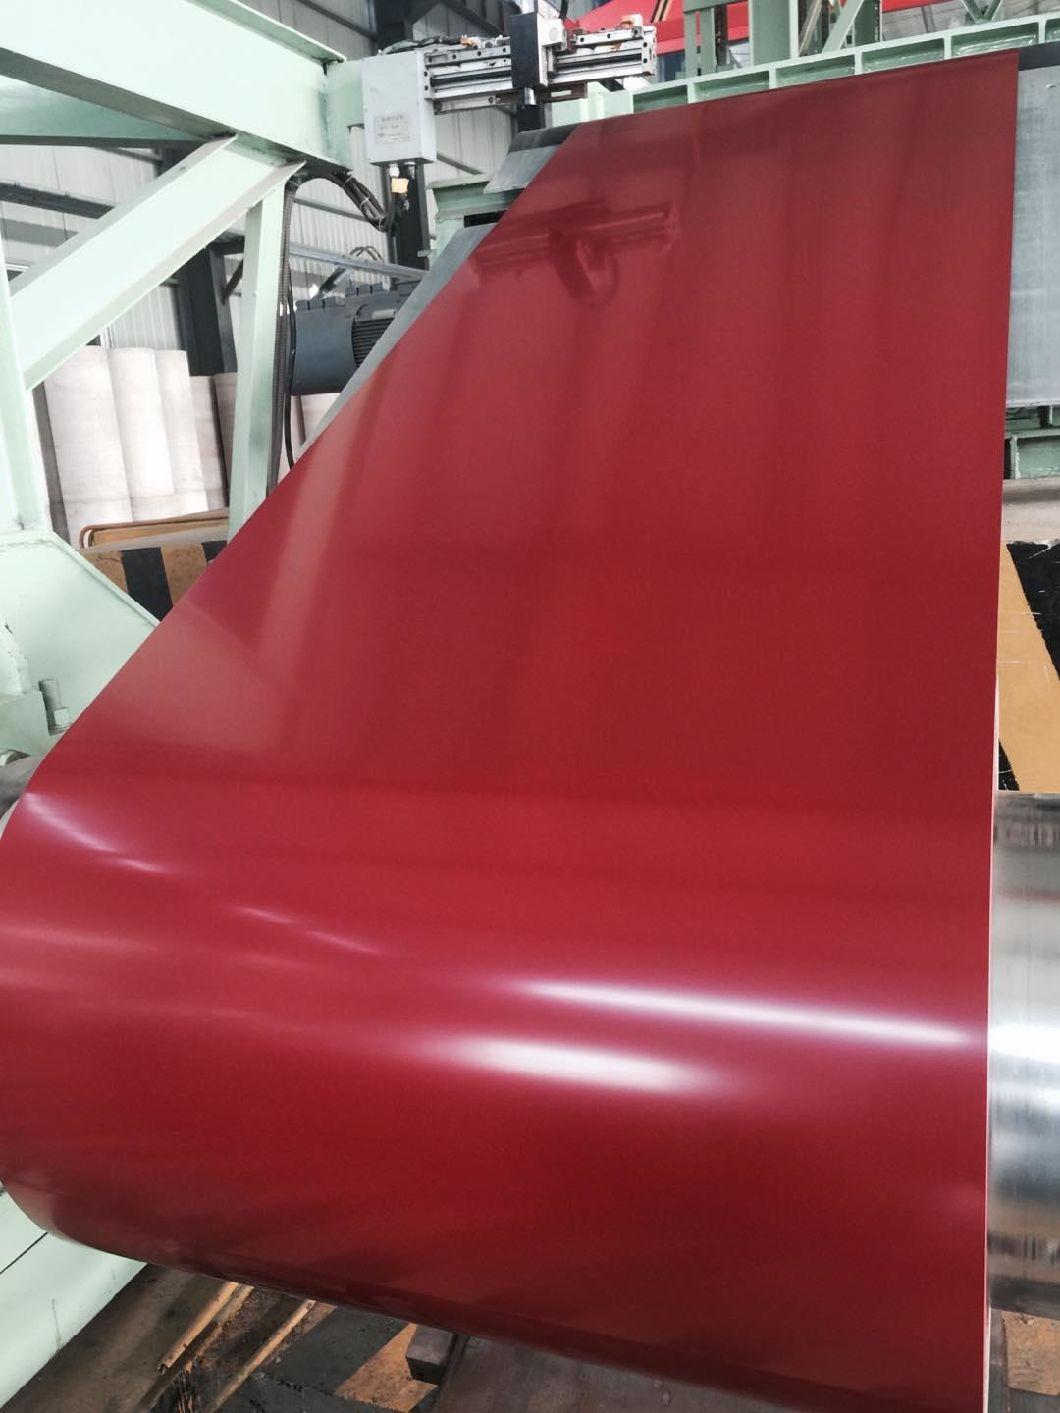 Prepainted Galvanized Steel Coil (PPGI/PPGL) / Color Coated Steel/CGCC/Roofing Steel